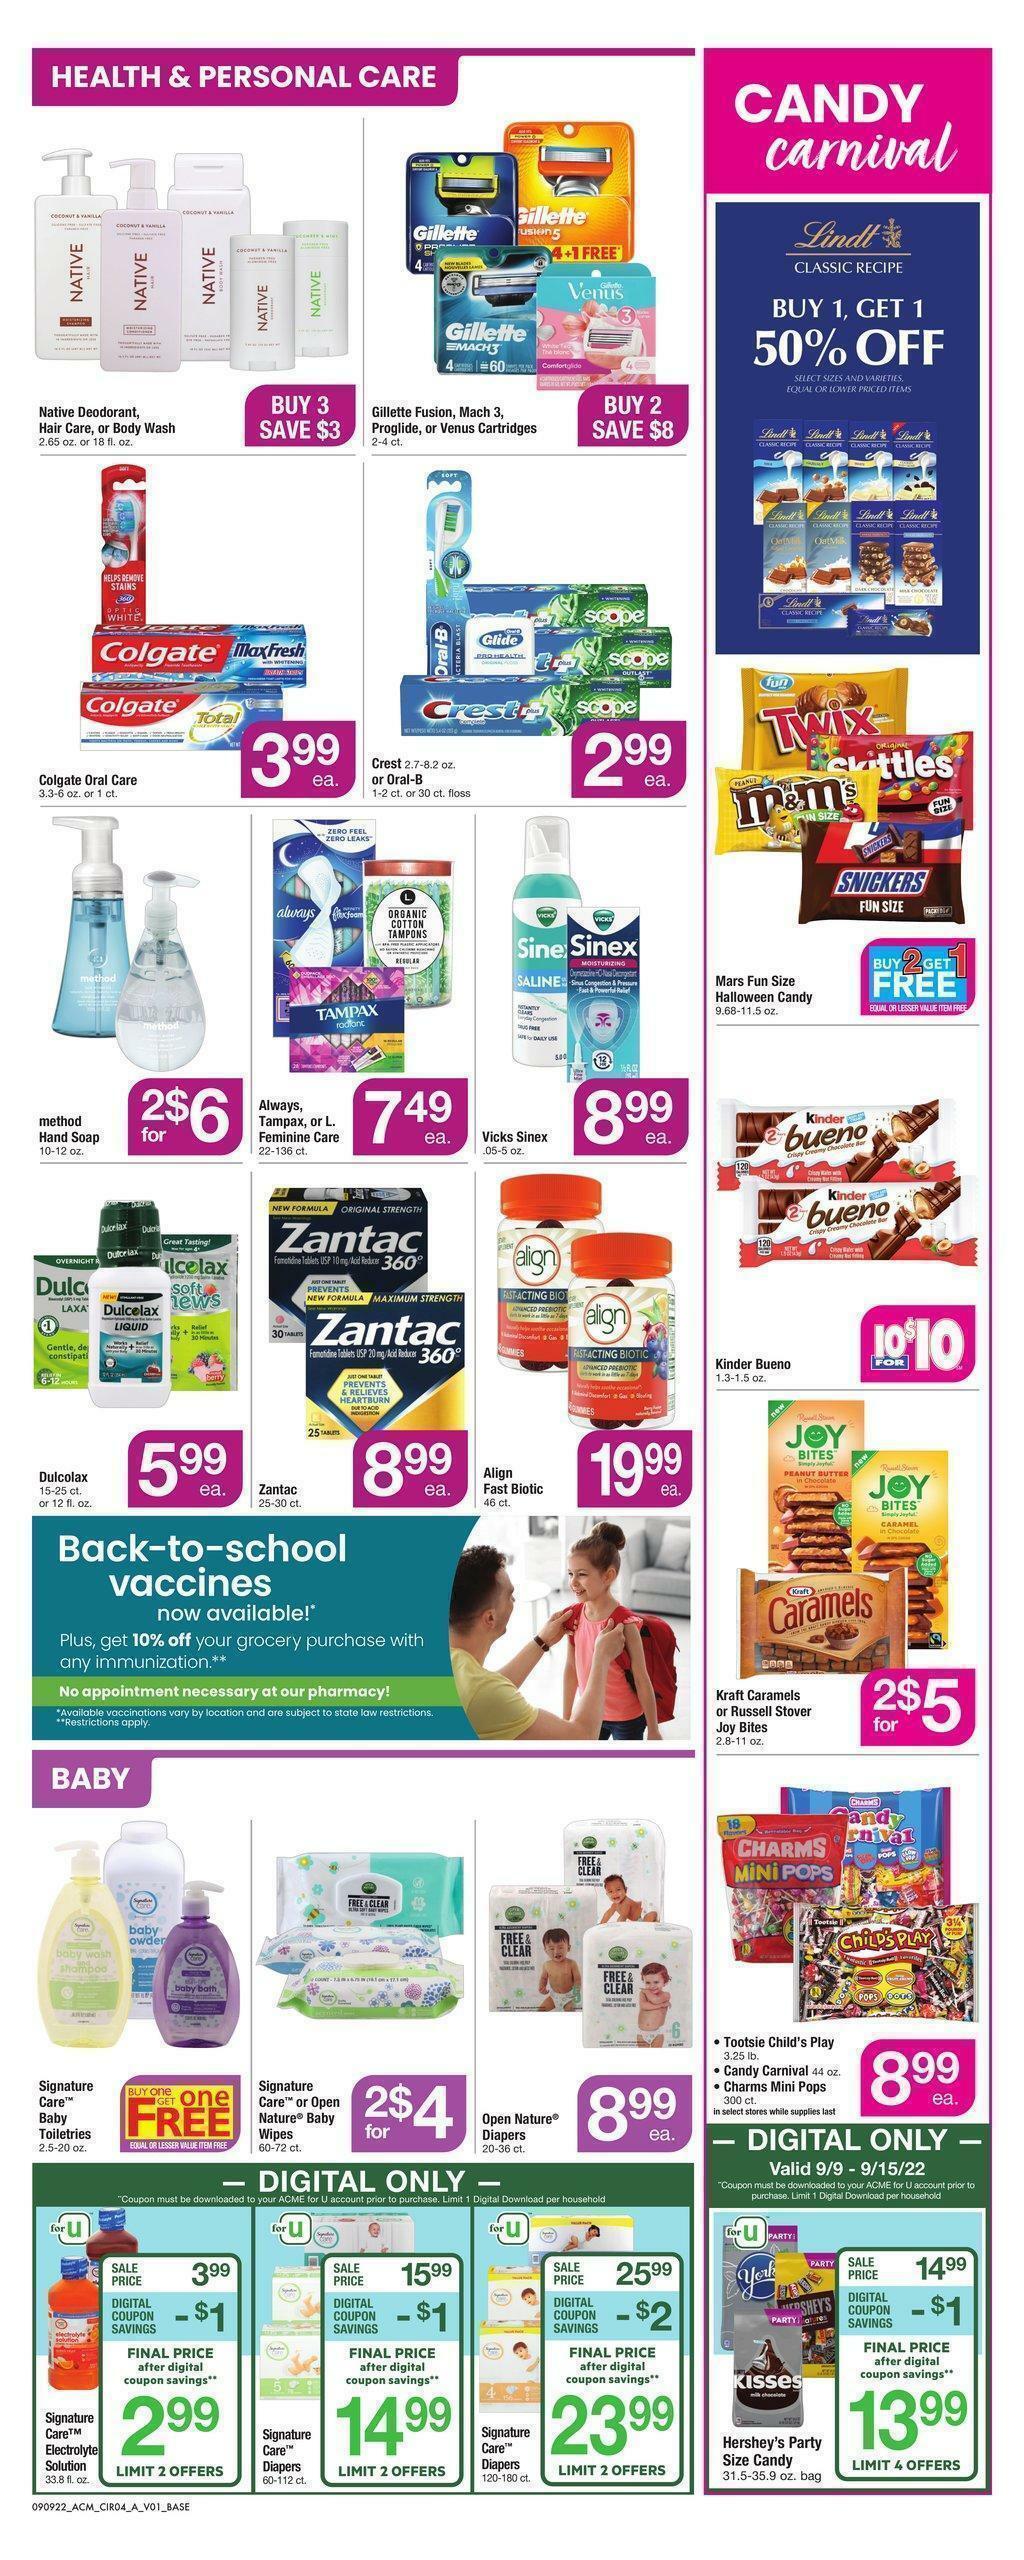 ACME Markets Weekly Ad from September 9